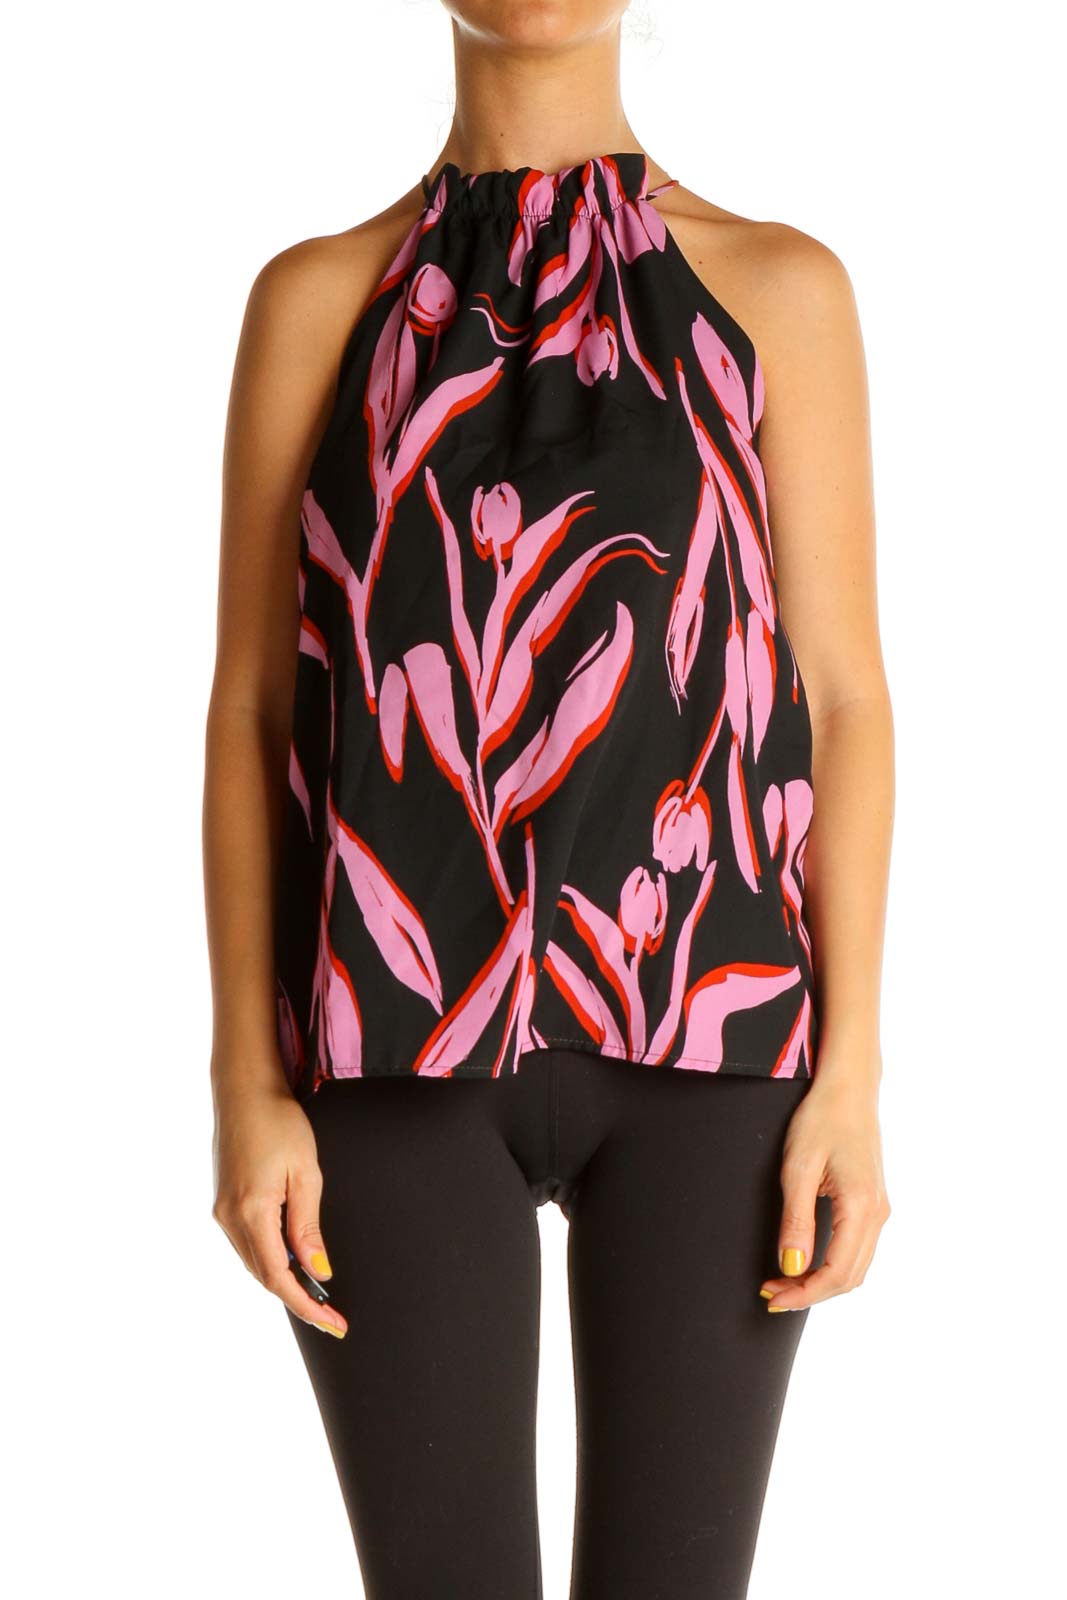 Black Graphic Print All Day Wear Blouse Front